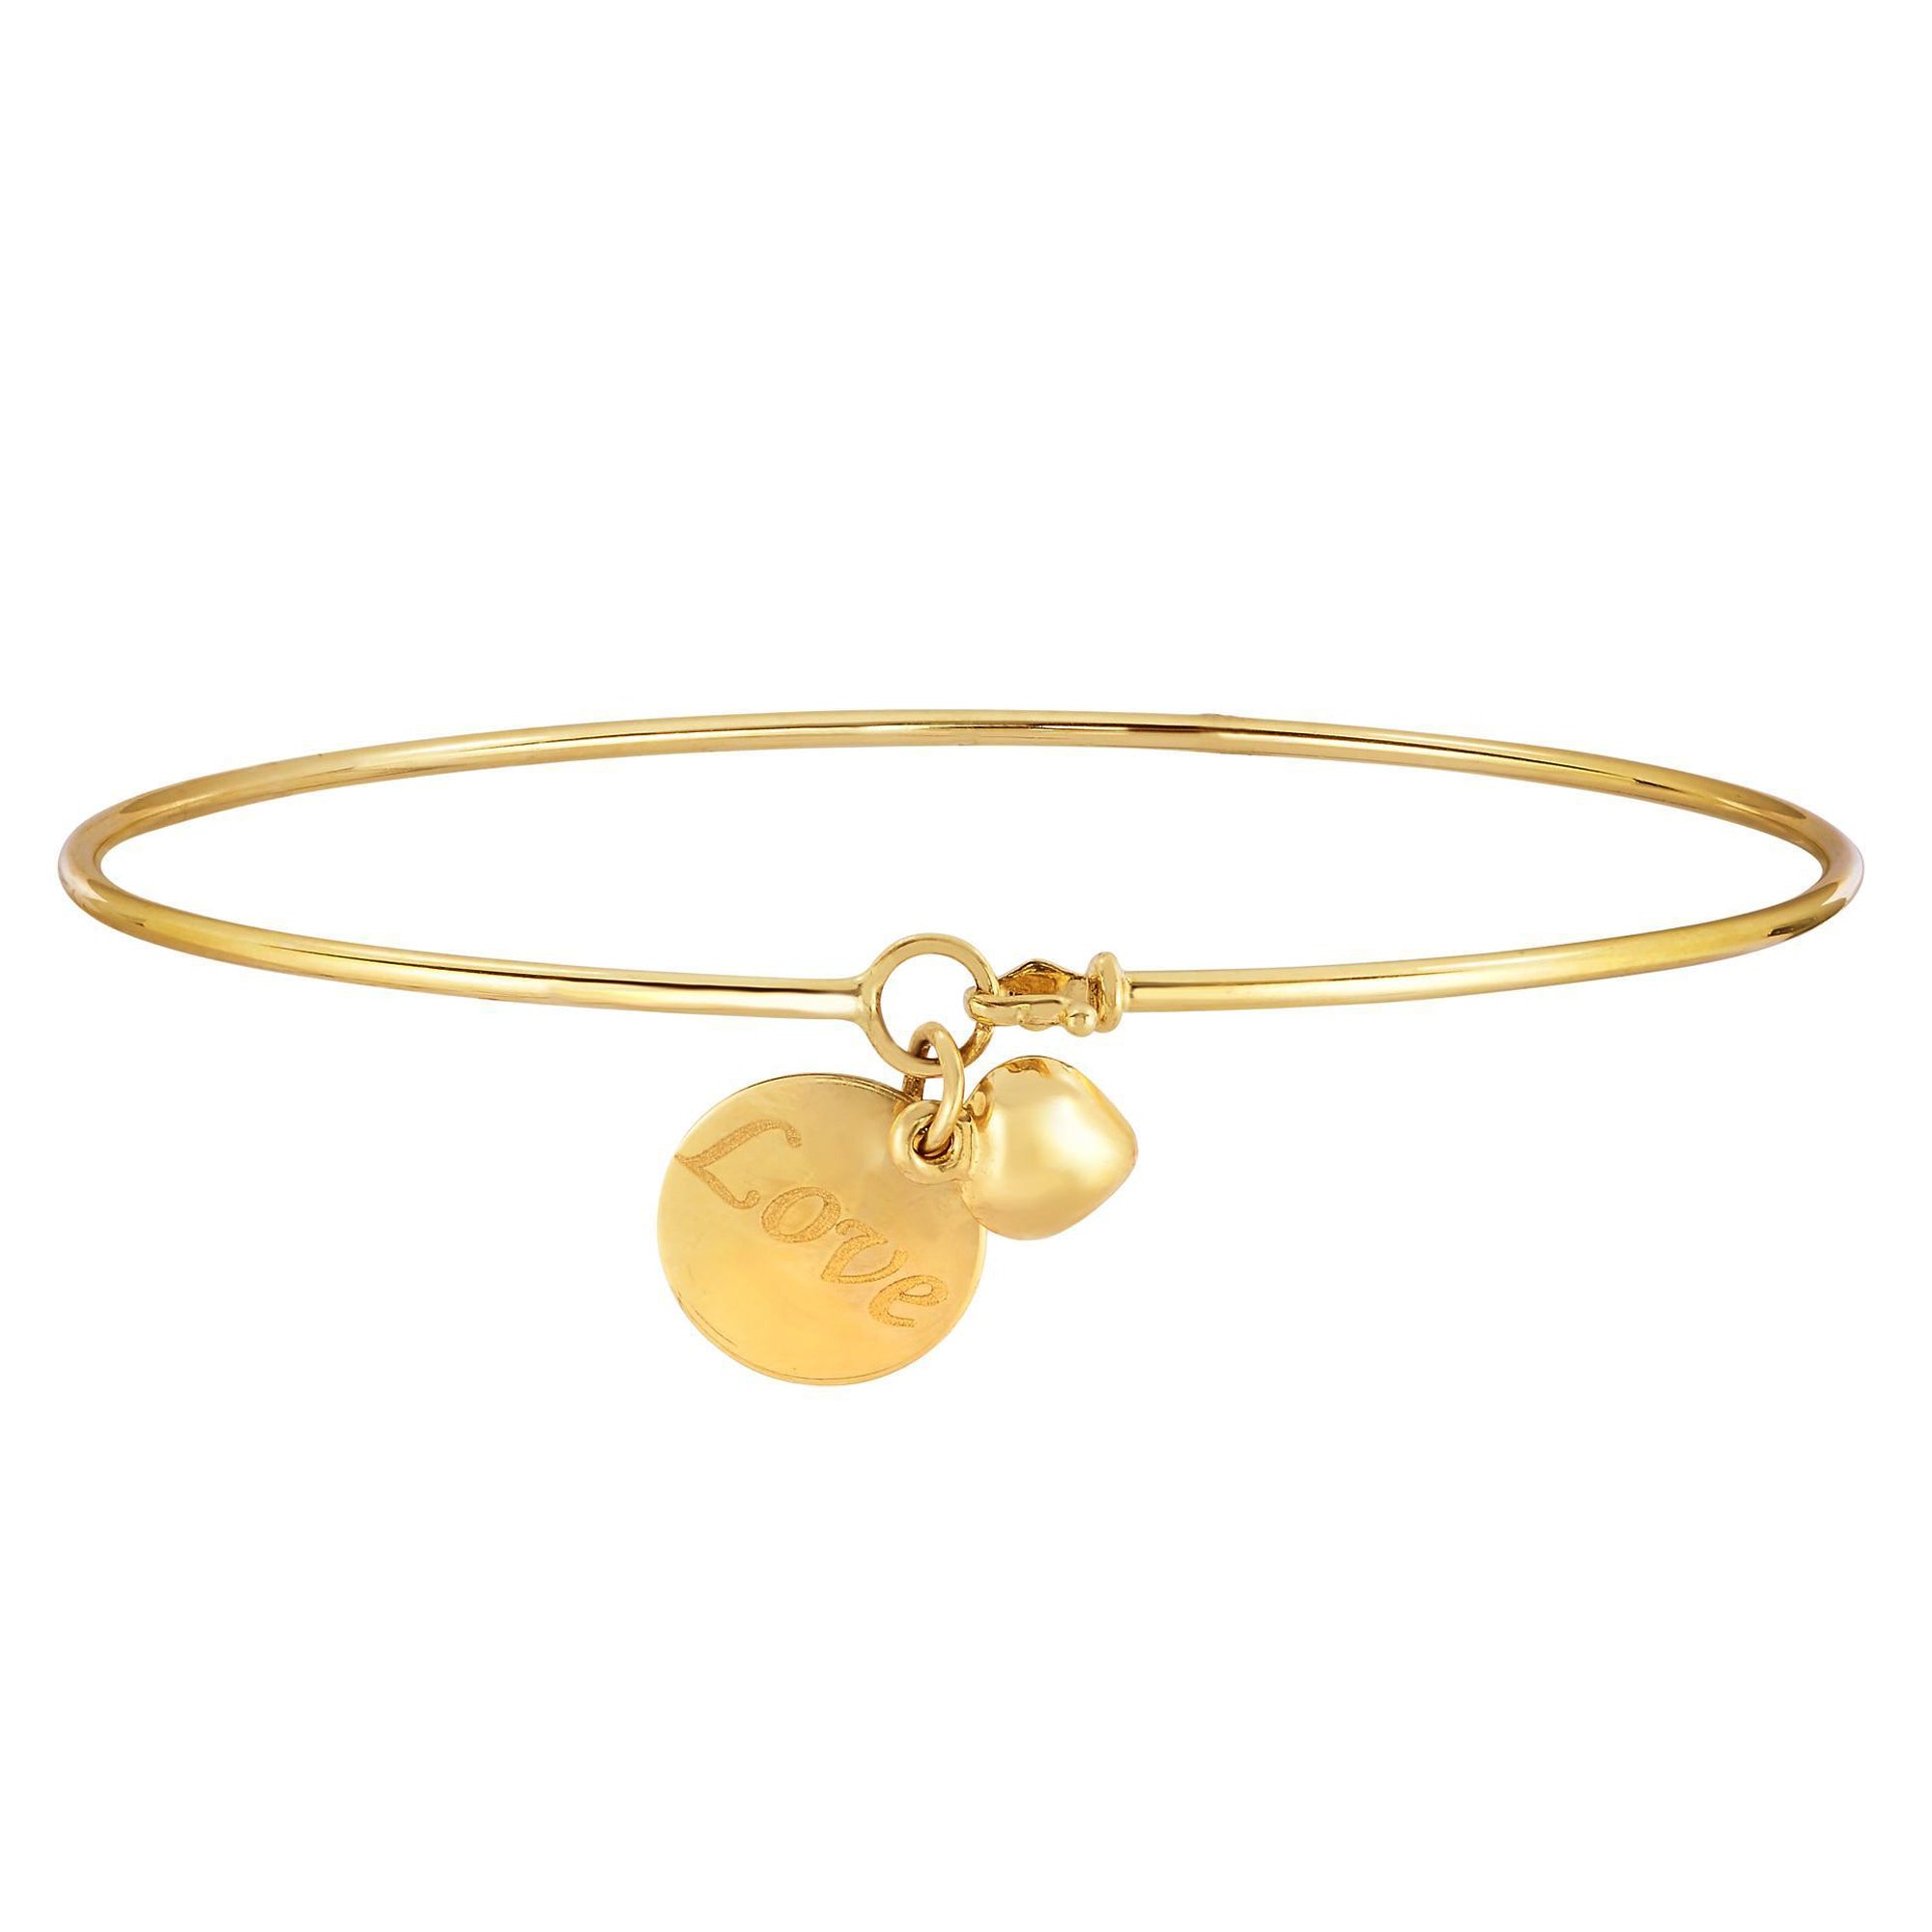 14k Yellow Gold Shiny Thin Bangle with Puff Heart And Love Engraved Plate Charm, 7.25" fine designer jewelry for men and women